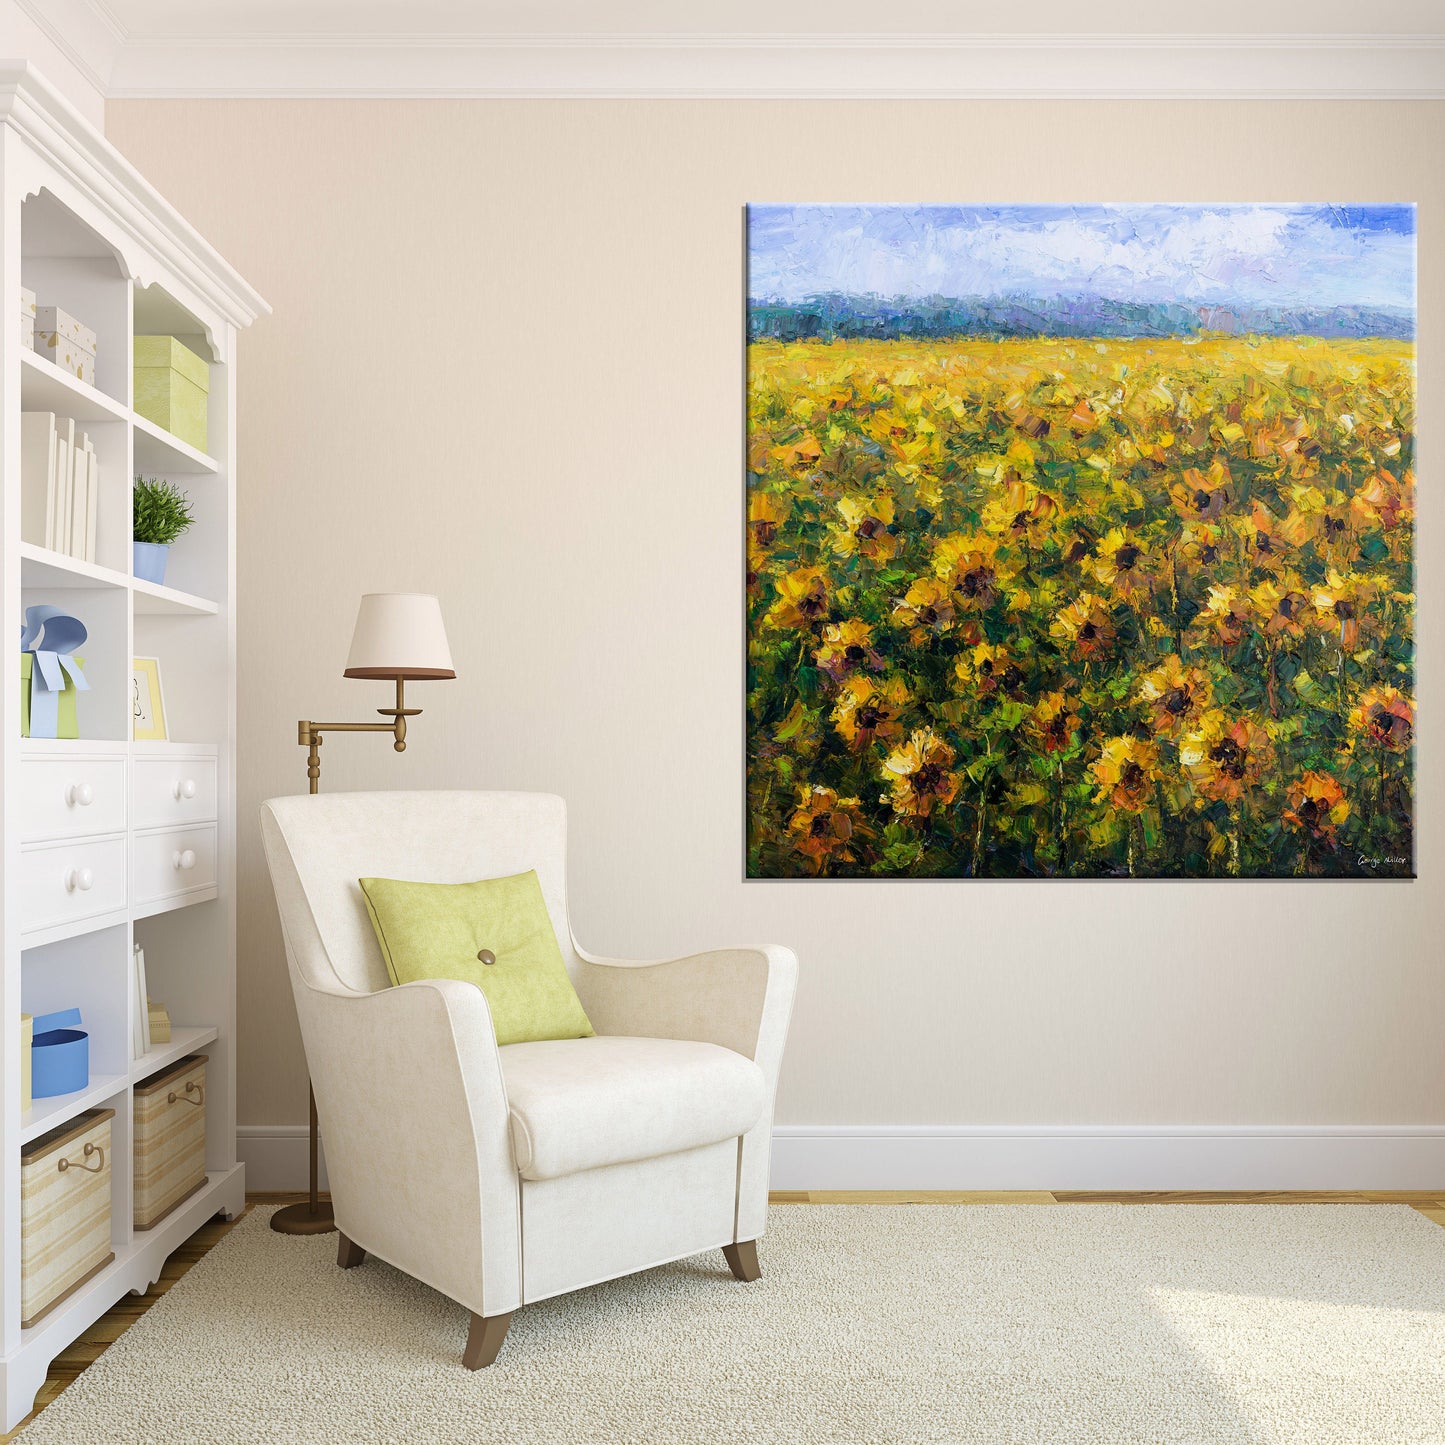 Landscape Painting, Large Oil Painting, Sunflower Fields, Abstract Painting, Original Art, Canvas Art, Family Wall Decor, GeorgeMillerArt